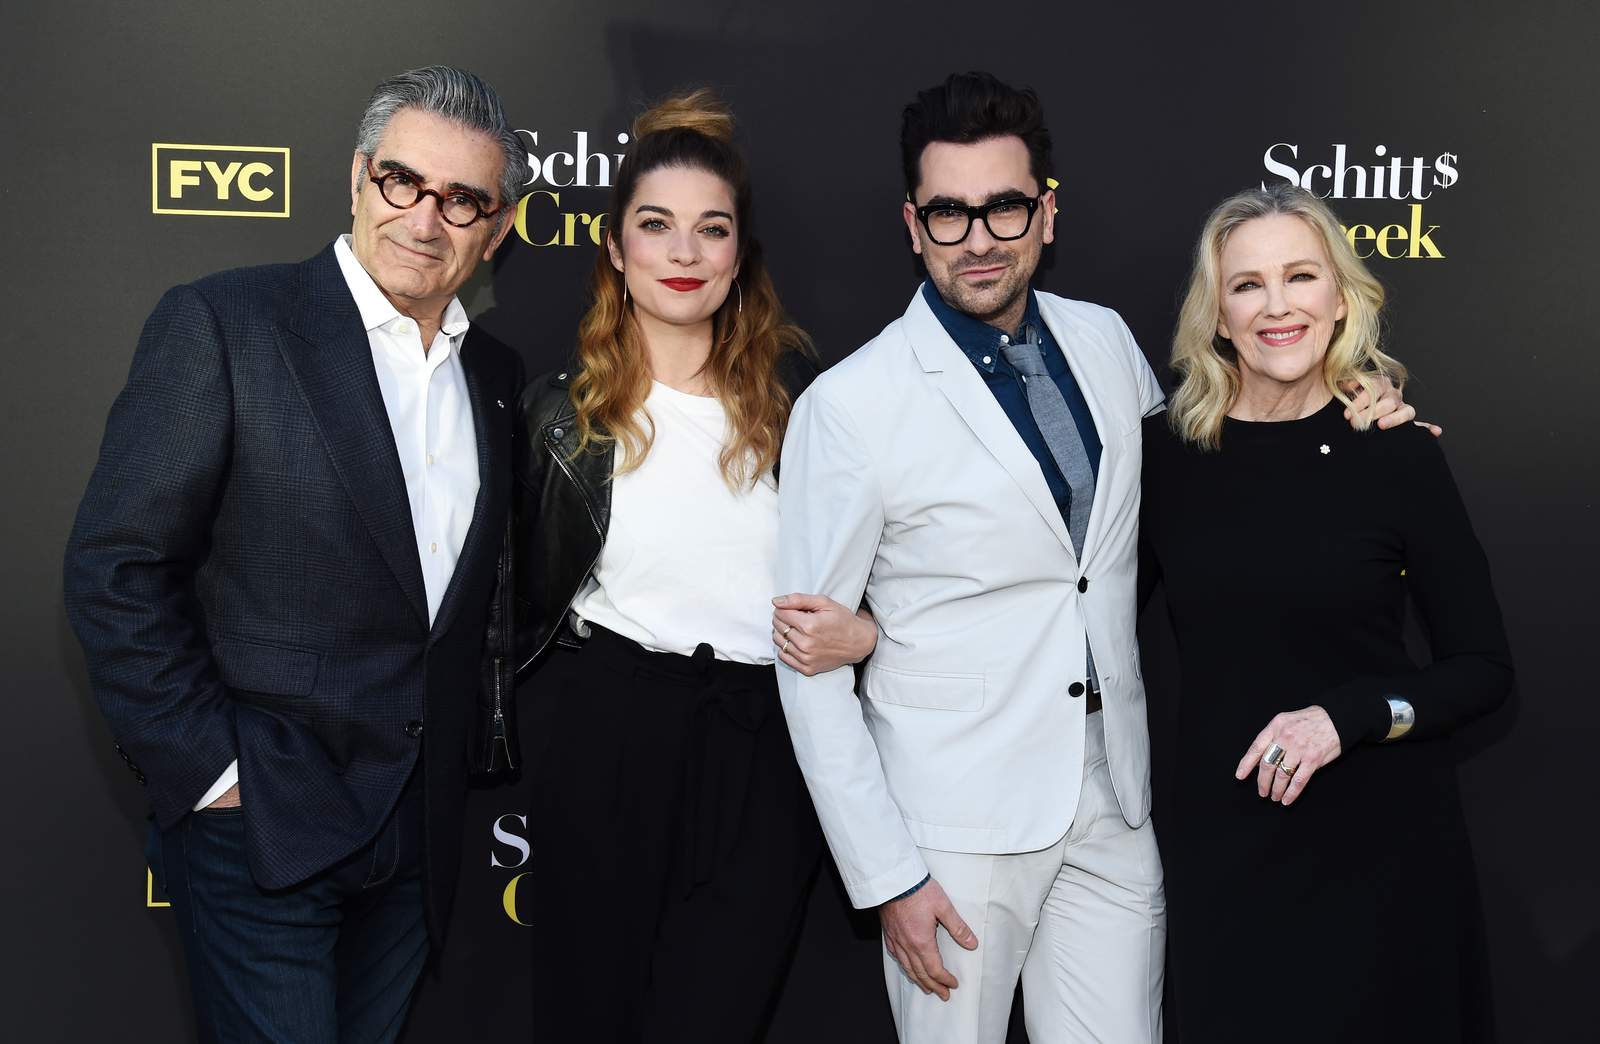 Yes, ‘Schitt’s Creek’ deserved all of those Emmys, and you can finally watch the final season on Netflix Oct. 7